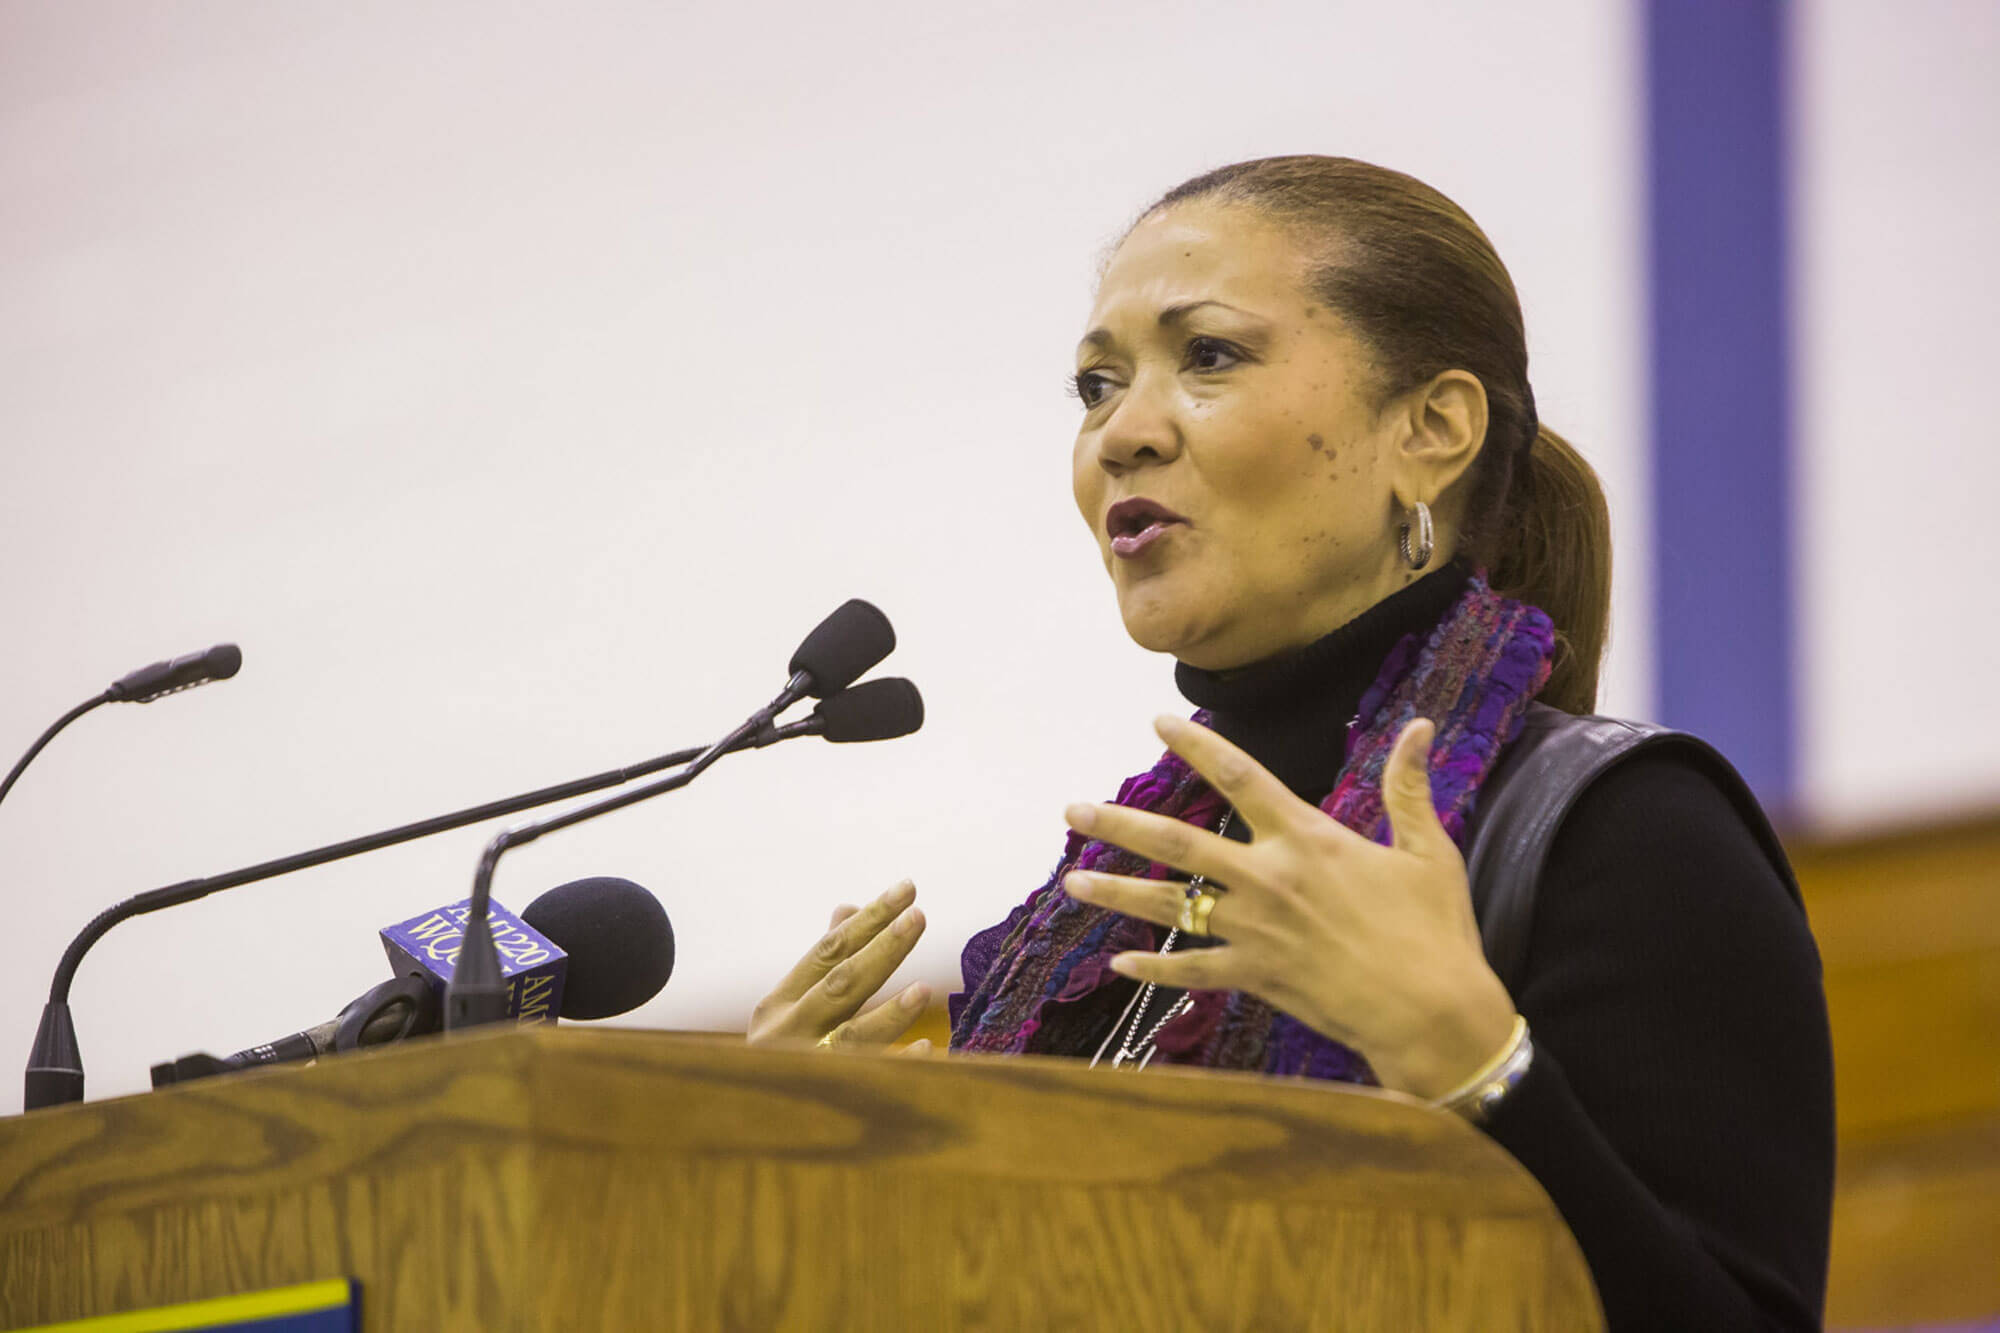 Michele Norris speaks at a podium during Quinnipiac's annual Black History Month keynote event.